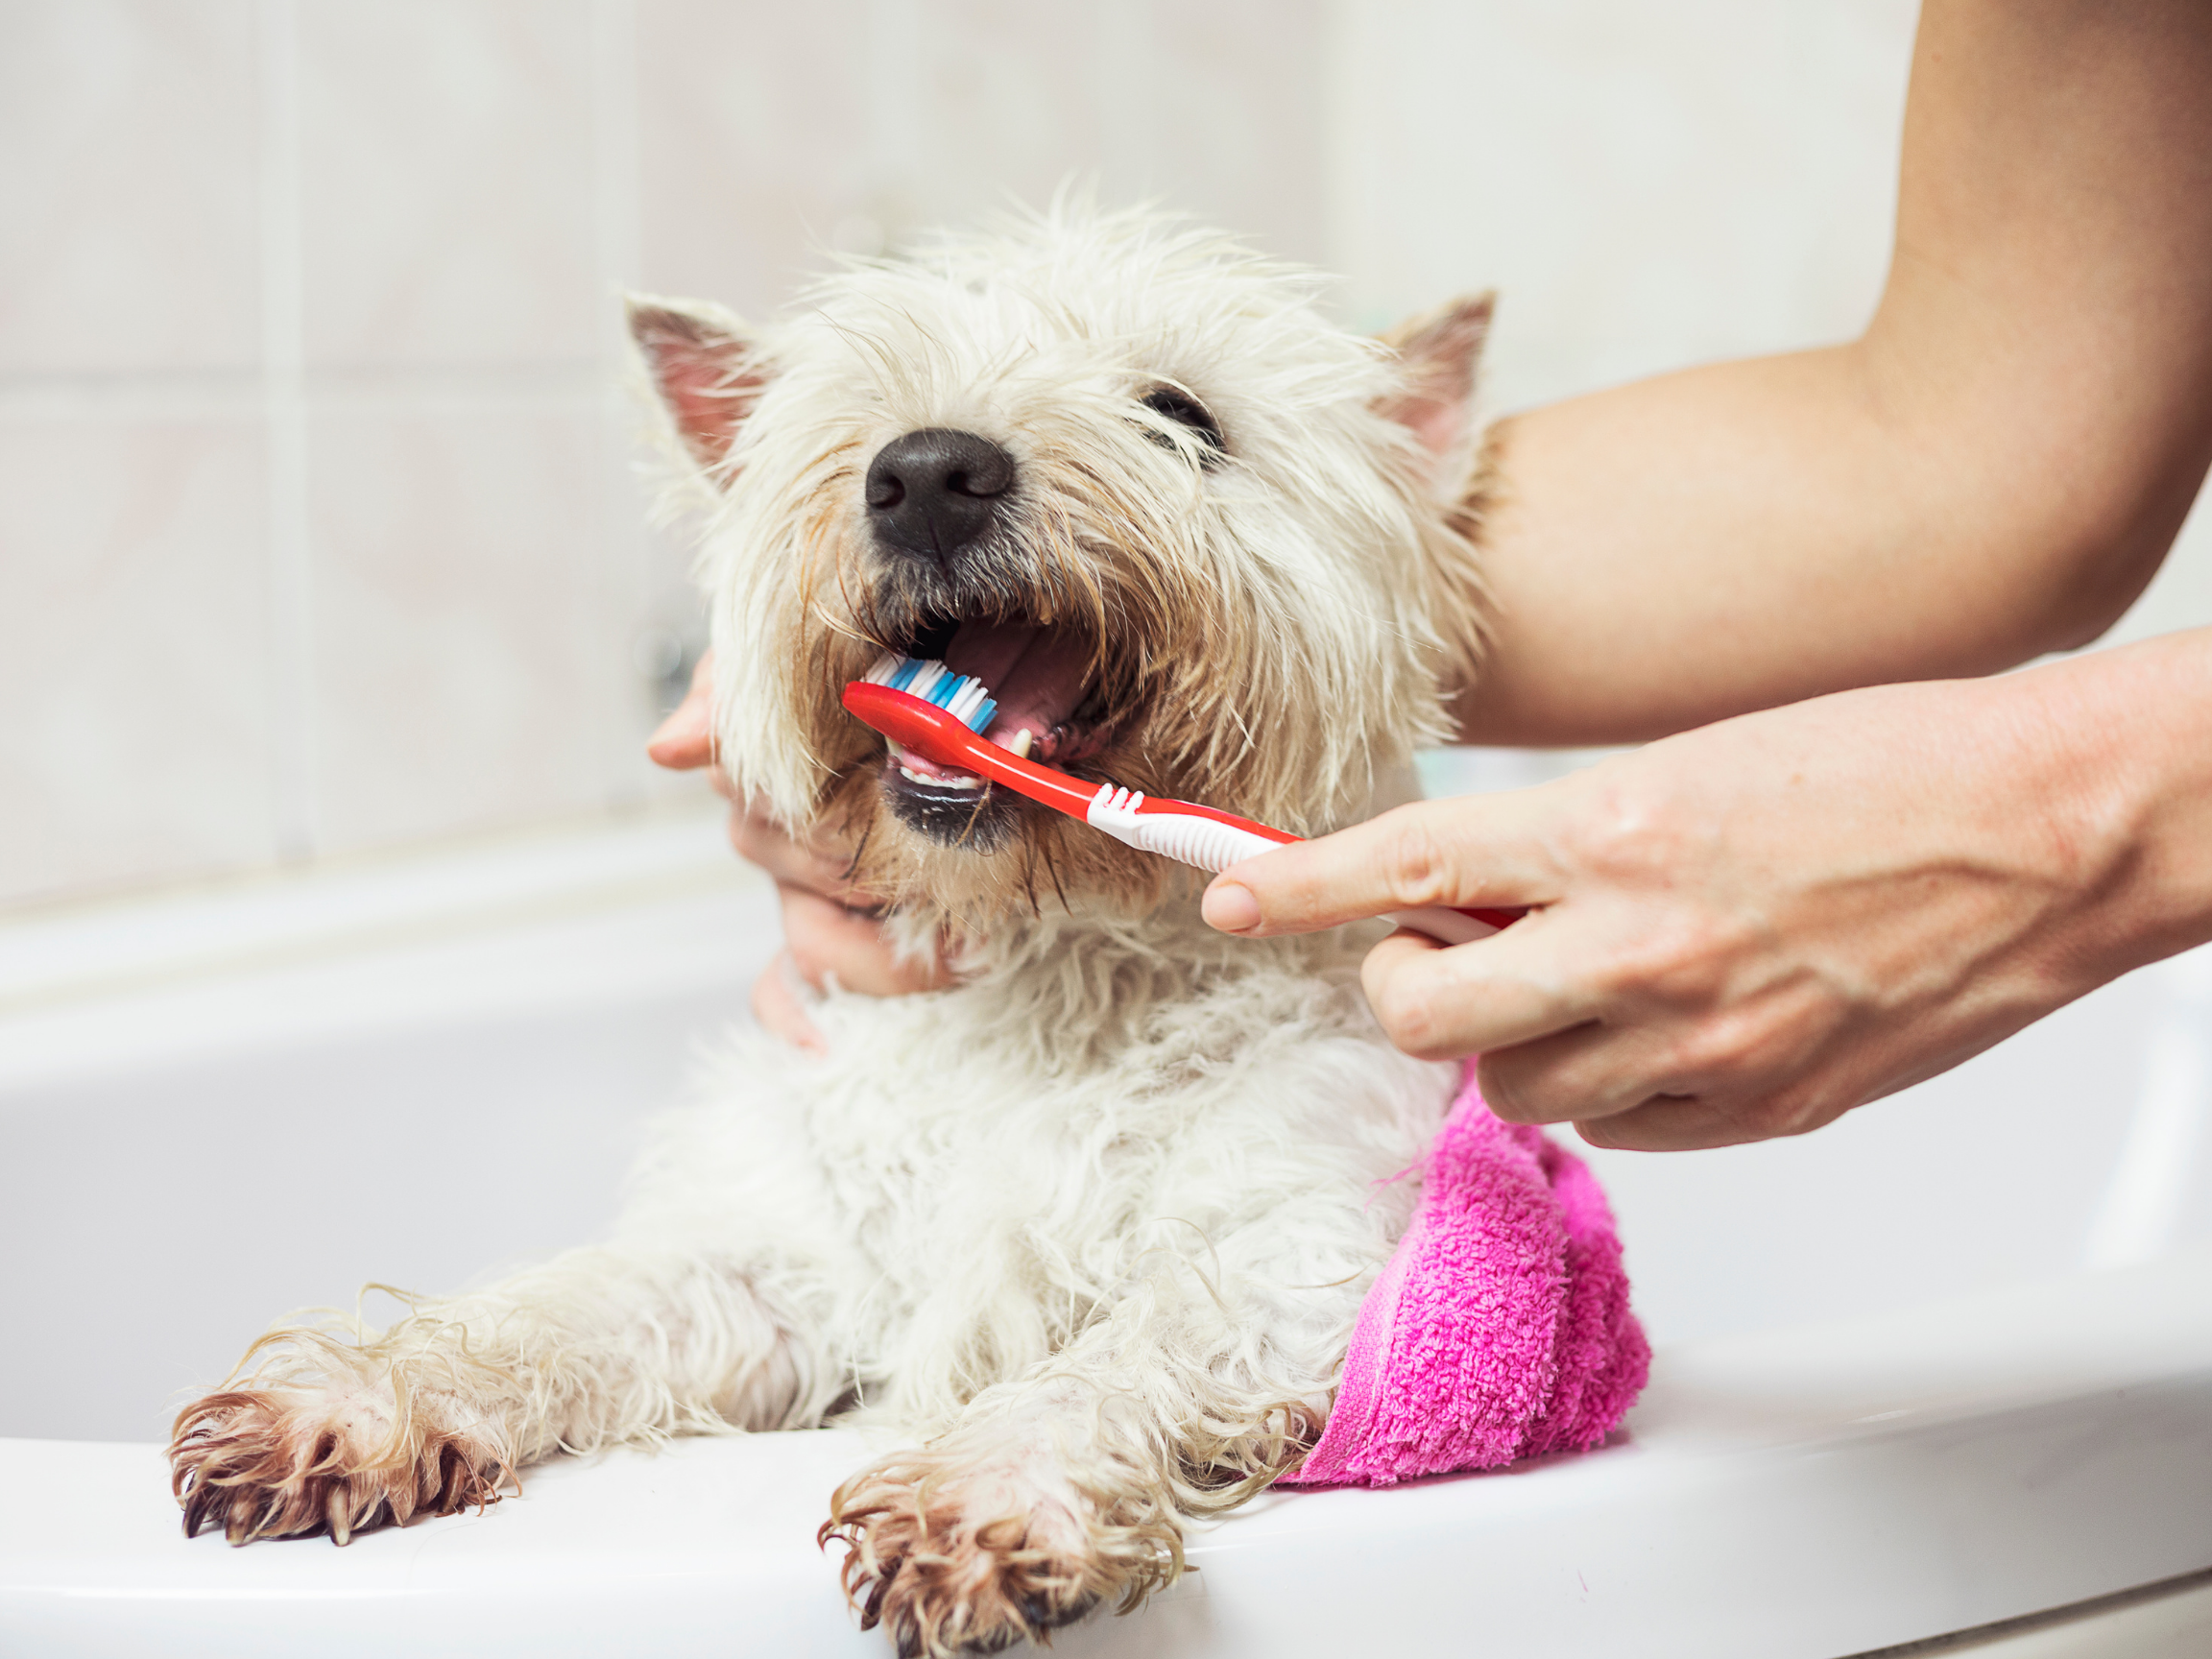 can you brush a dog's teeth with human toothpaste?